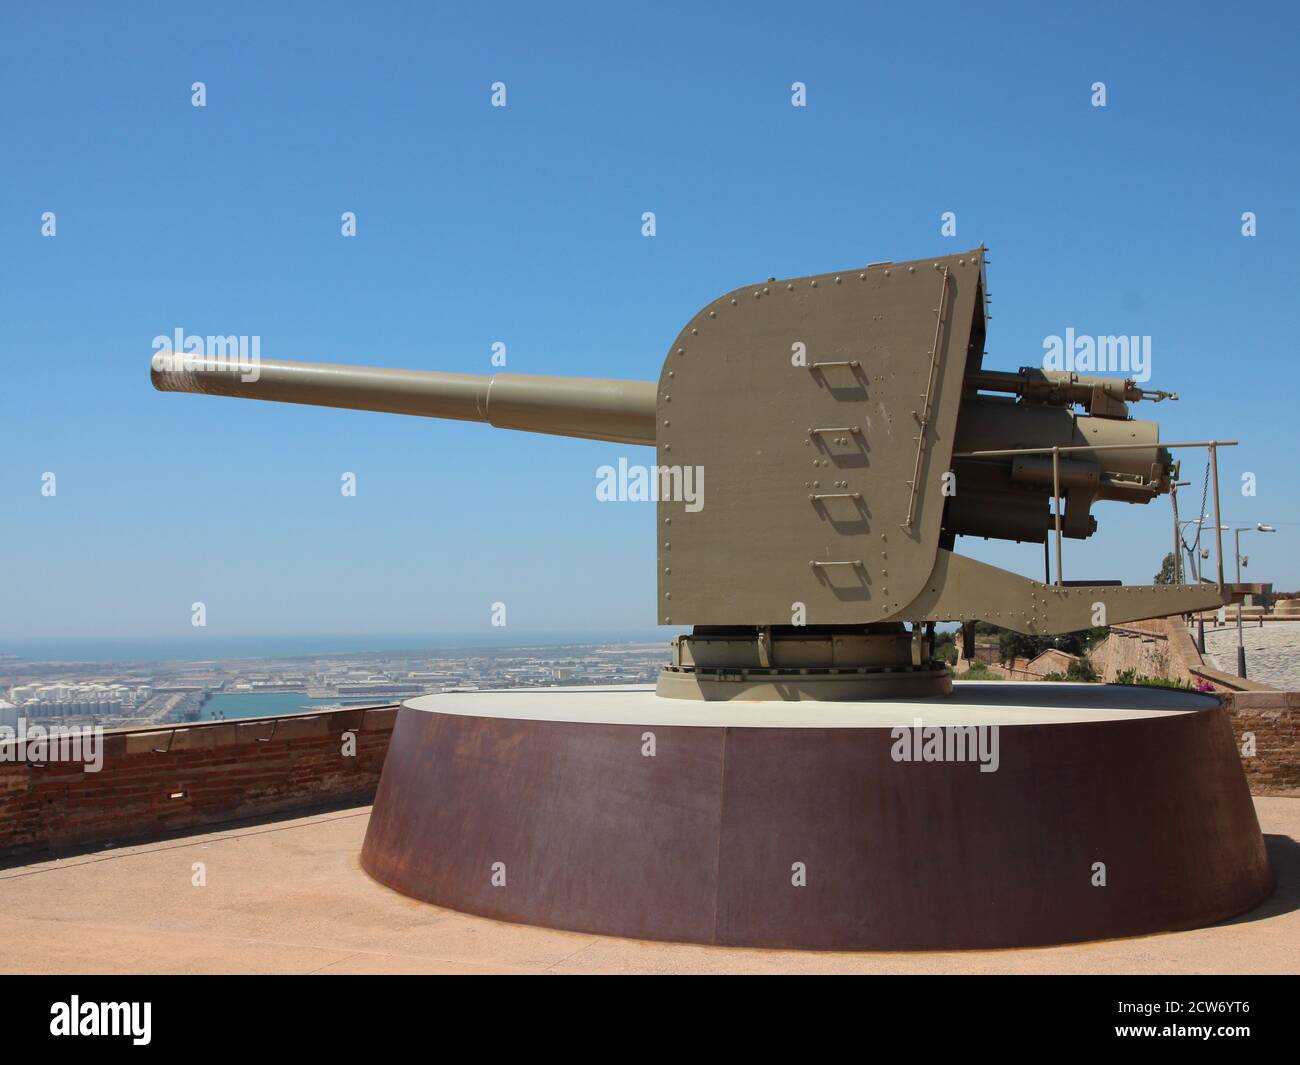 Old military cannon at Montjuïc Castle in Barcelona Spain pointing to the left. Clear blue sky with city in the background. Stock Photo